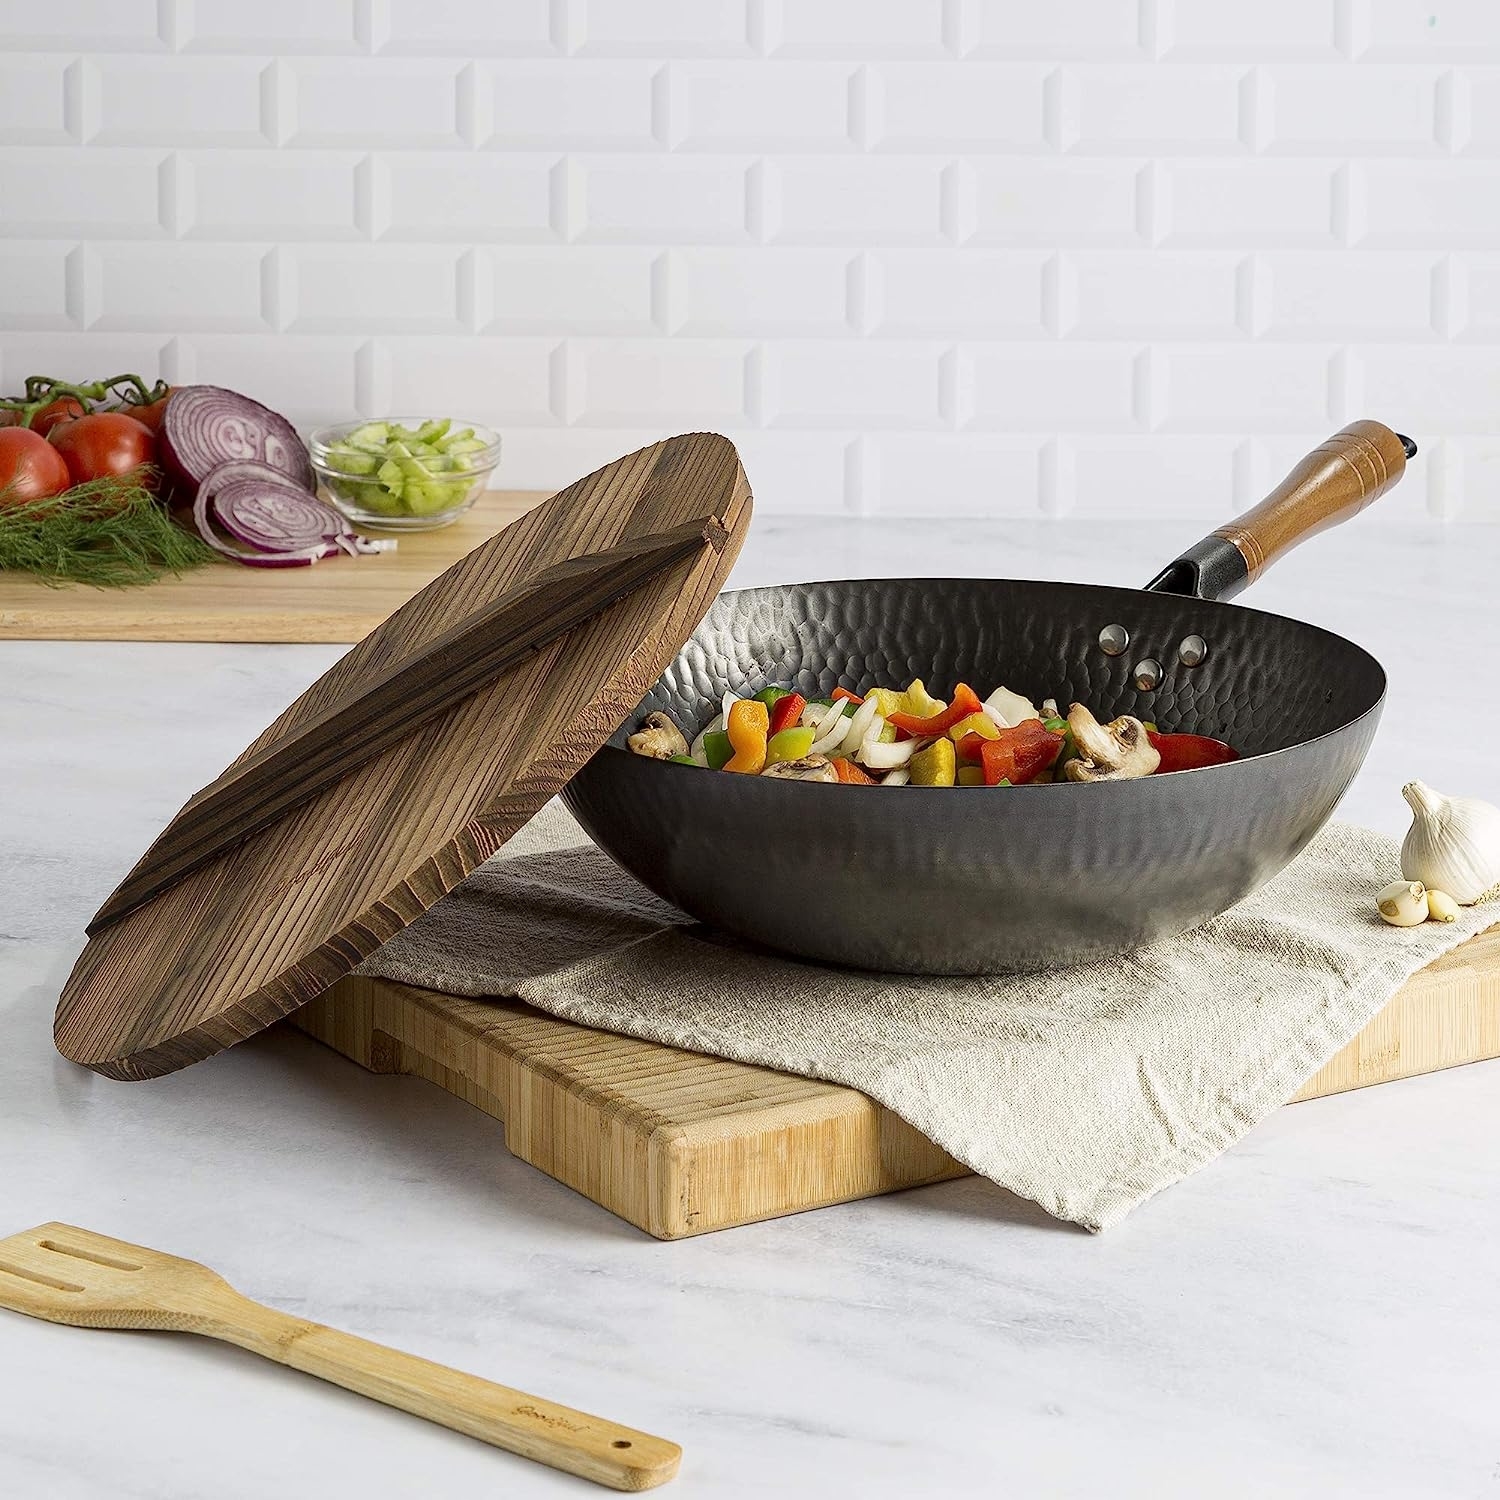 the dimpled wok with a wooden lid